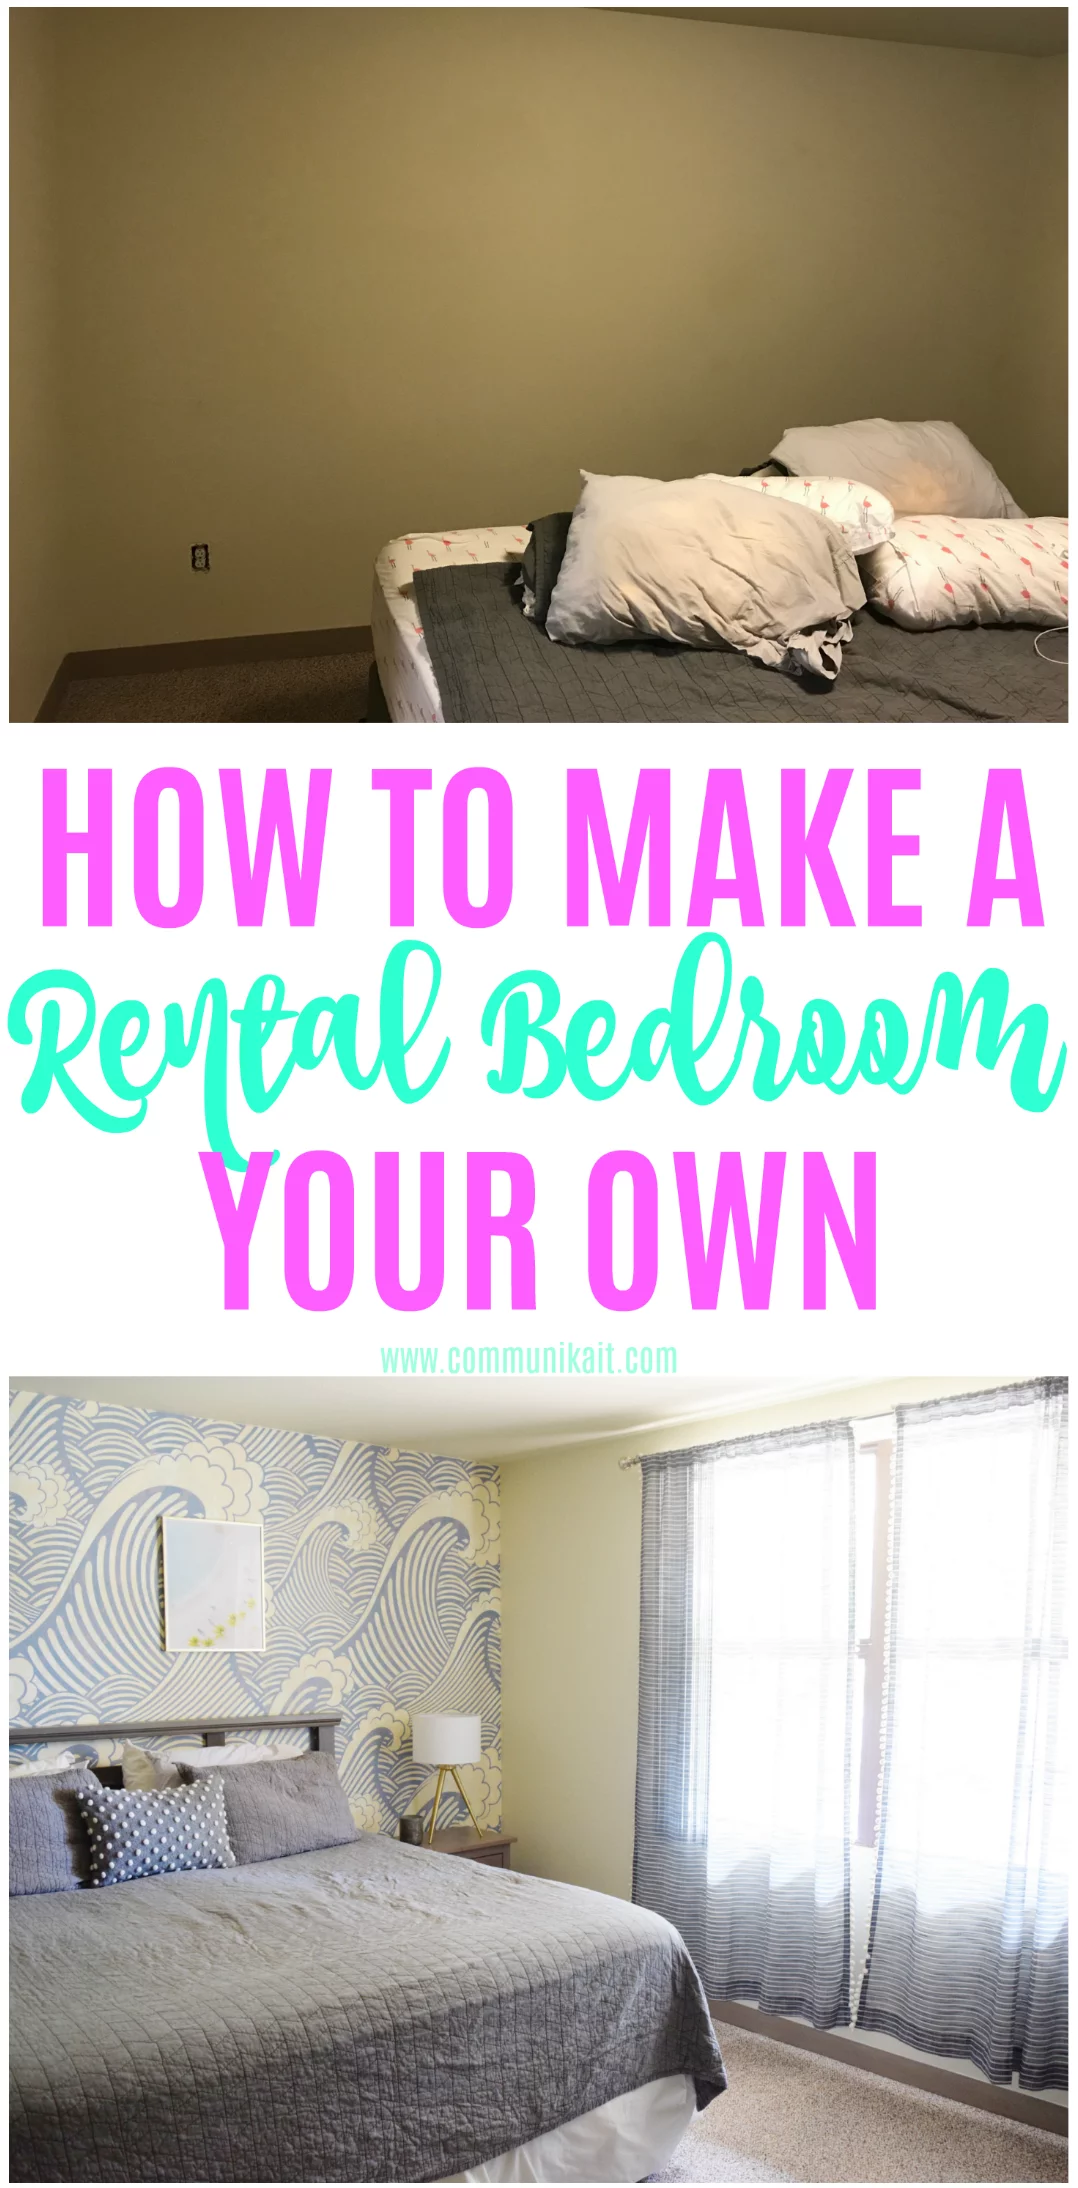 How To Make A Rental Your Own: Master Bedroom Edition -Rental House Decorating - Rental House Hacks - Ideas For Decorating Rental House - Rental House Upgrades On A Budget - Communikait by Kait Hanson